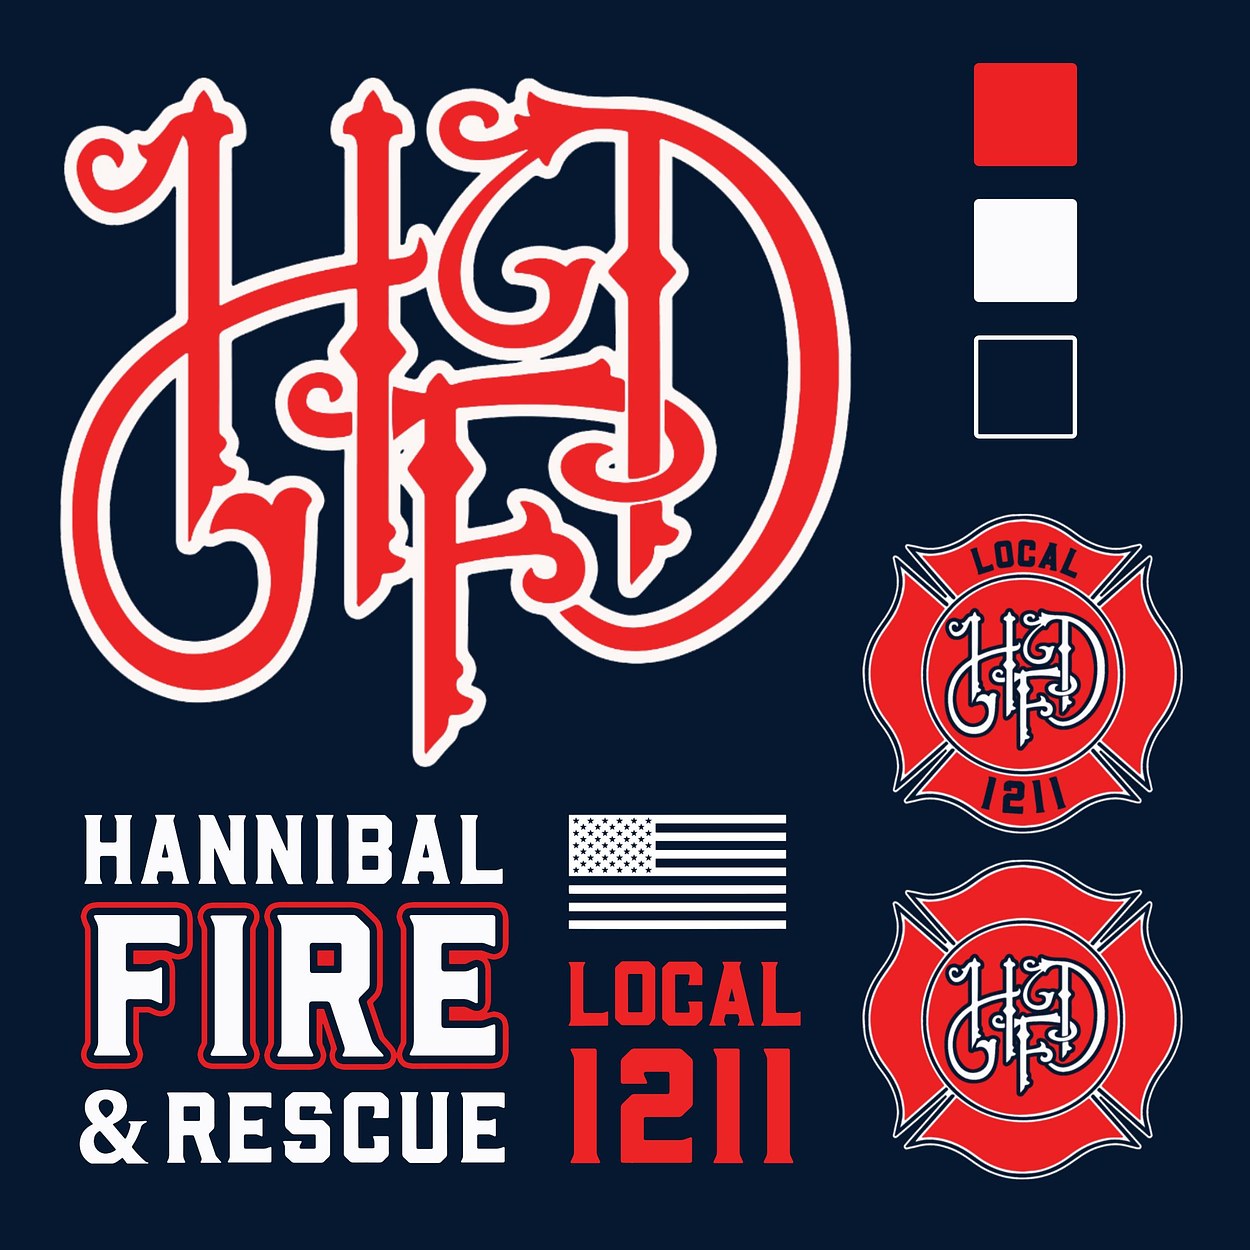 Hannibal Fire Department - New House Scramble Branding, Badge and Typography